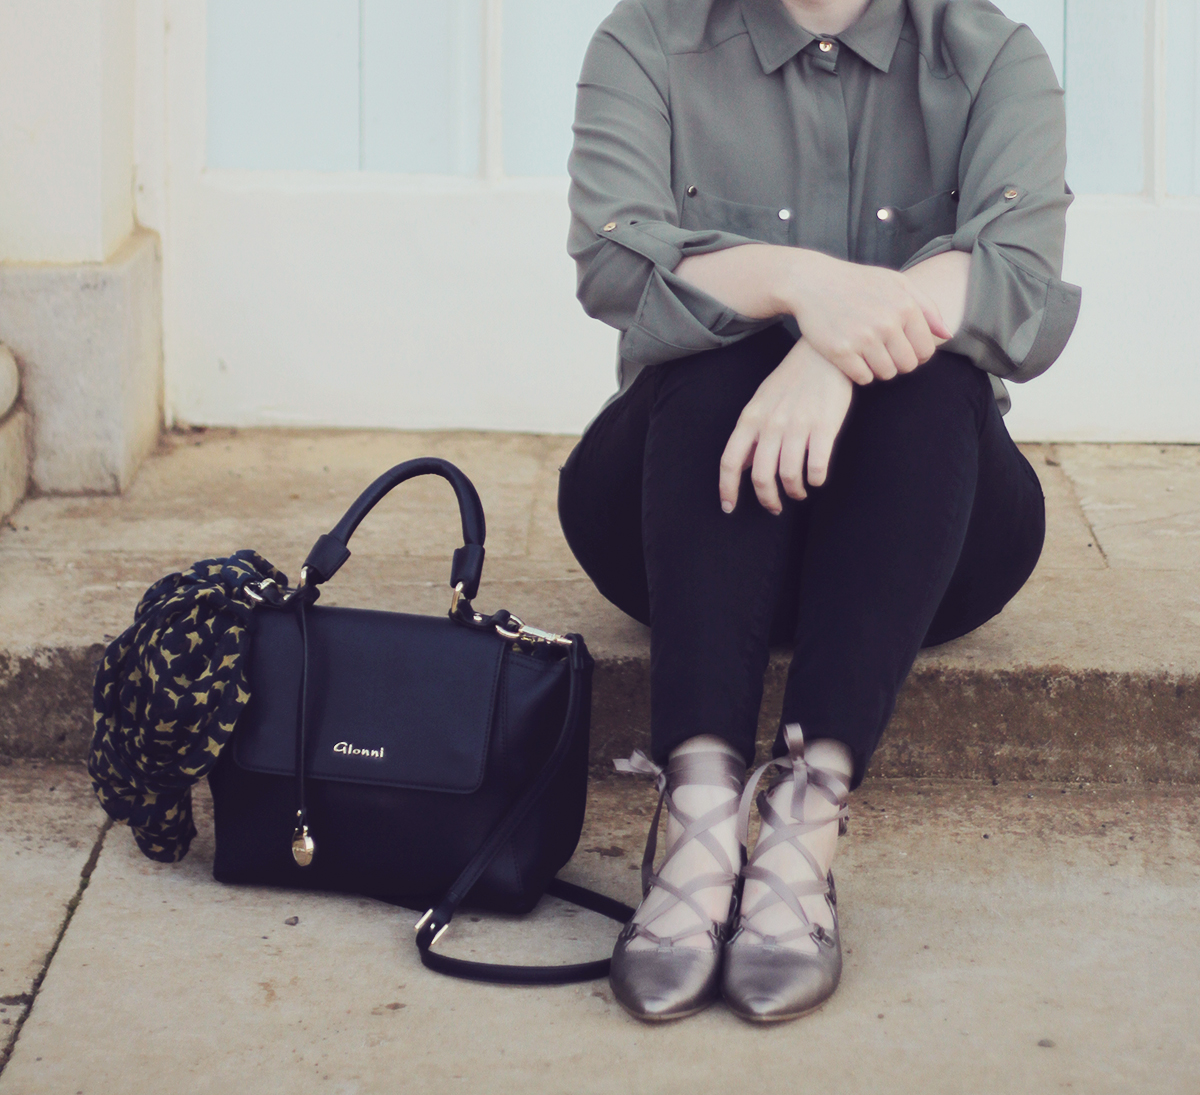 london-ballet-flats-and-jeans-with-bag